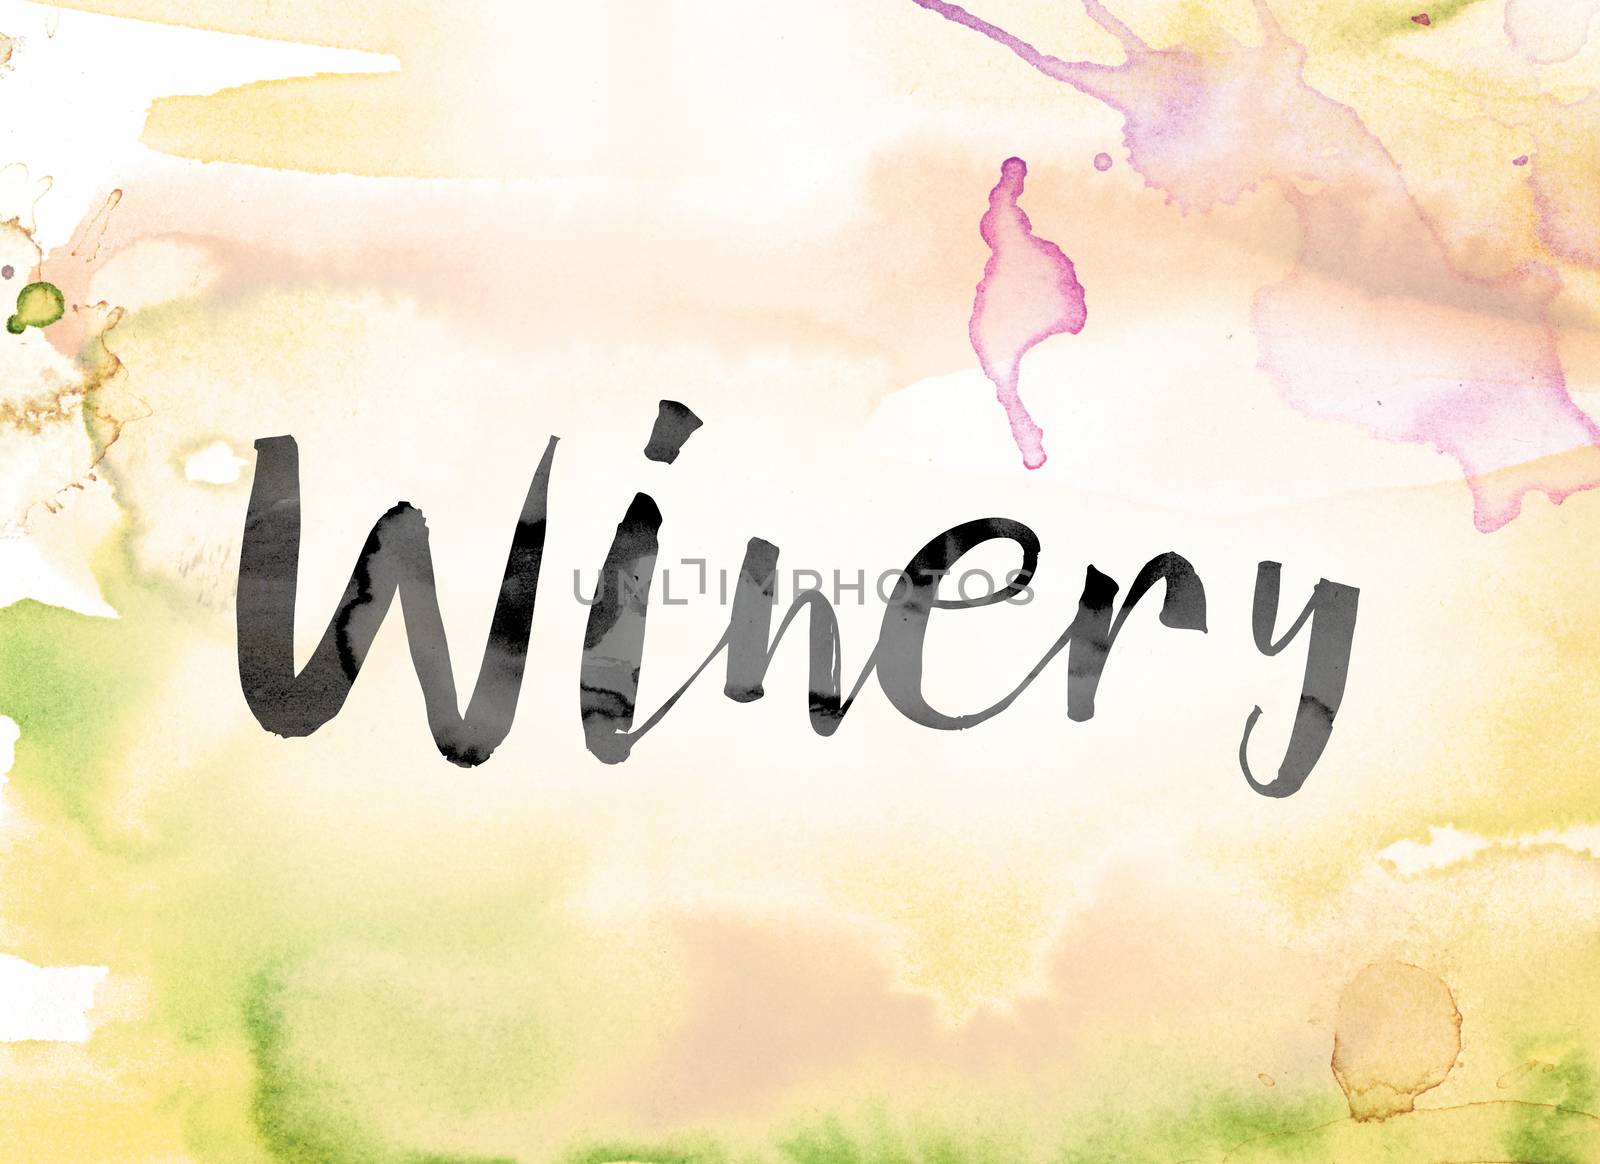 The word "Winery" painted in black ink over a colorful watercolor washed background concept and theme.